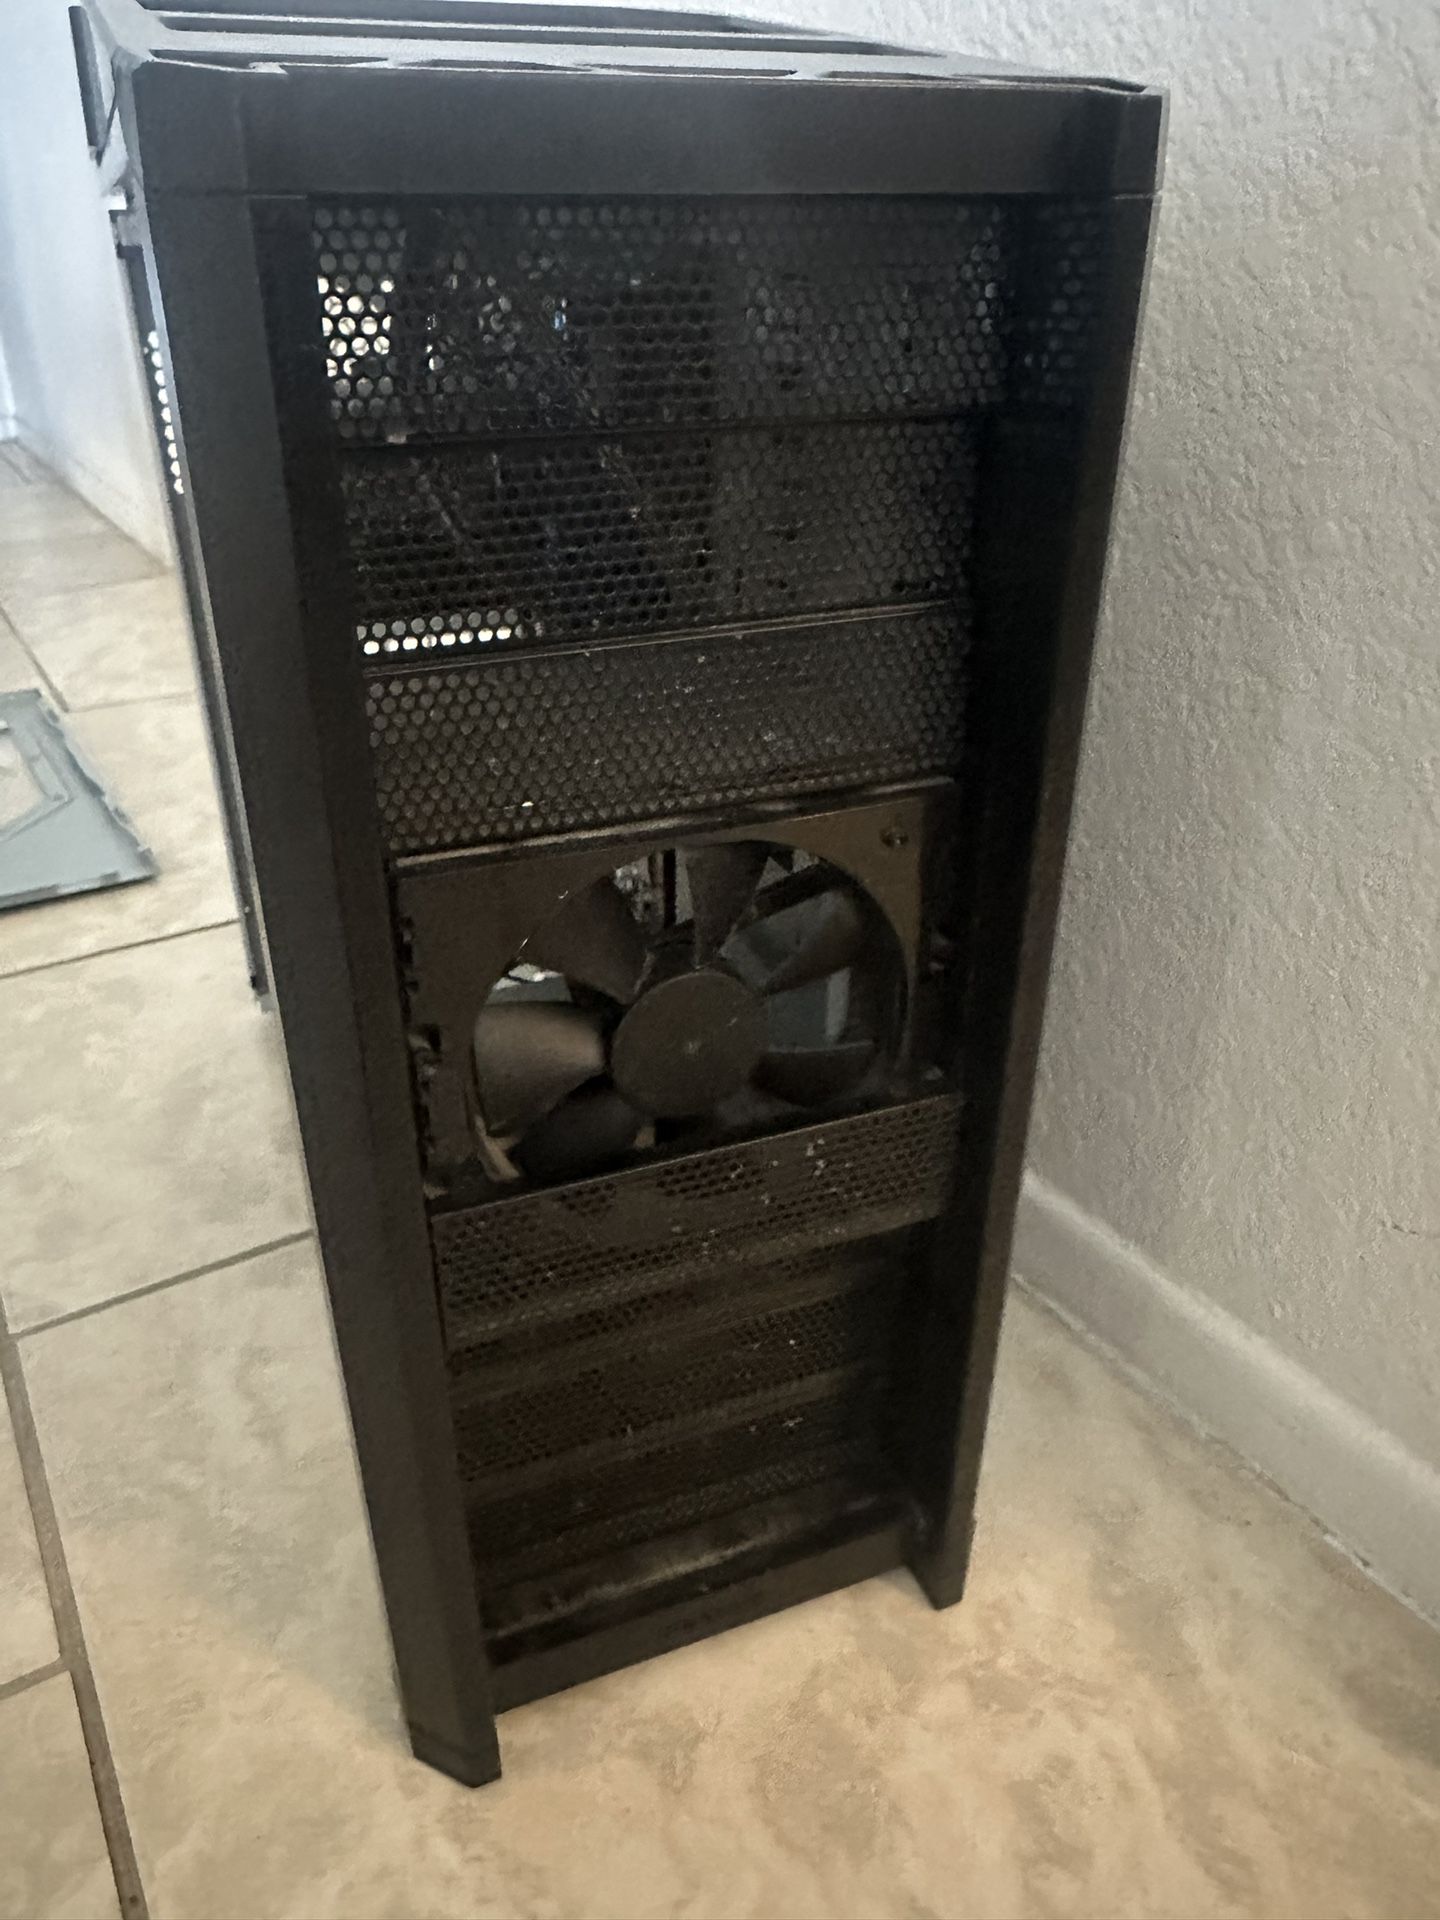 USED Computer for Parts